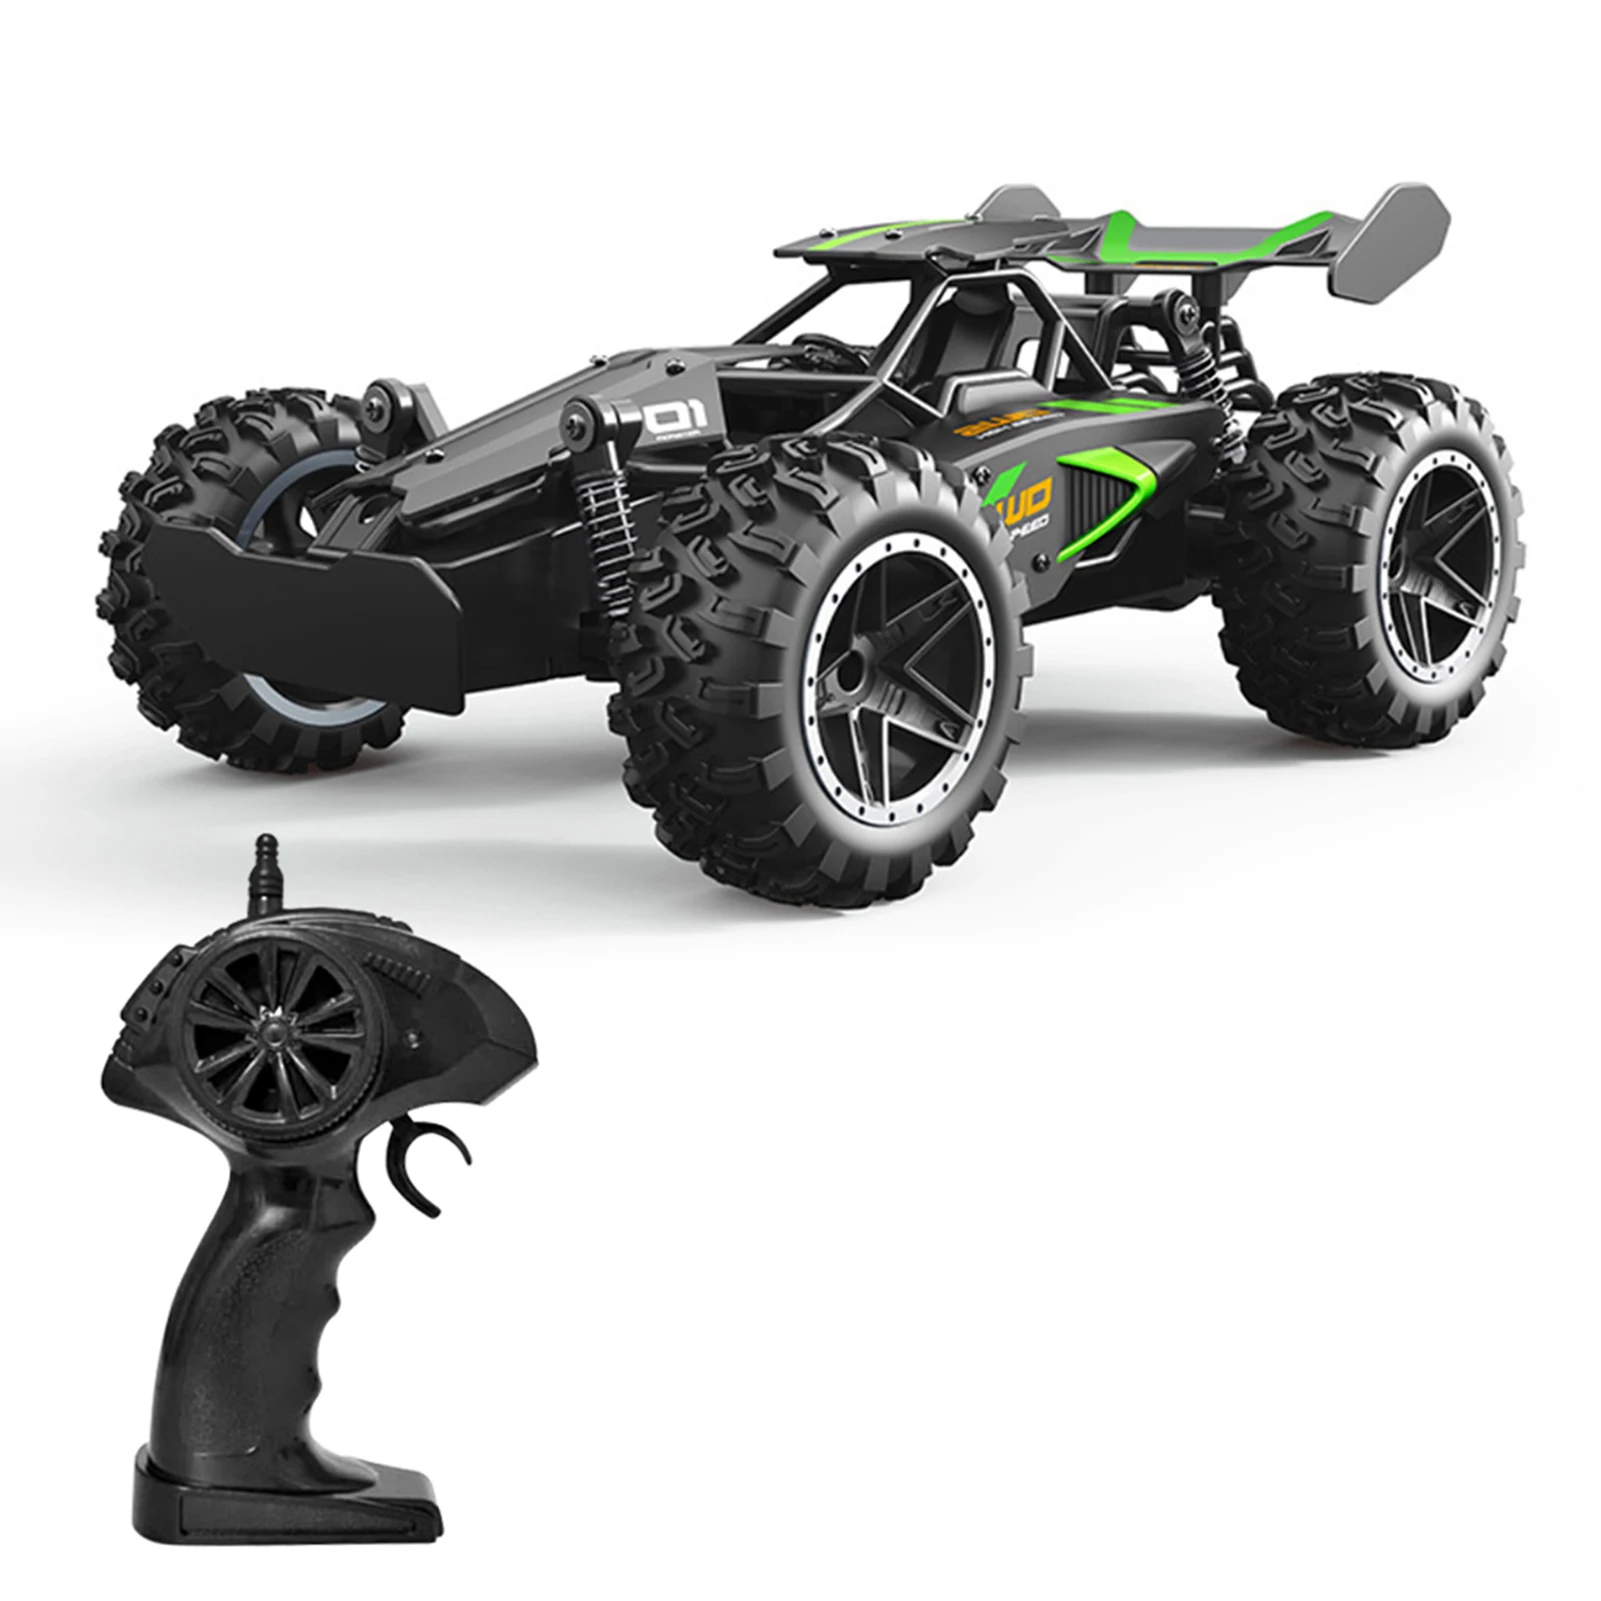 

RC Cars Off-Road Remote Control Car Trucks Vehicle 2.4Ghz 2WD 1: 18 Racing Climbing Cars Radio Electric Rock Buggy Toy